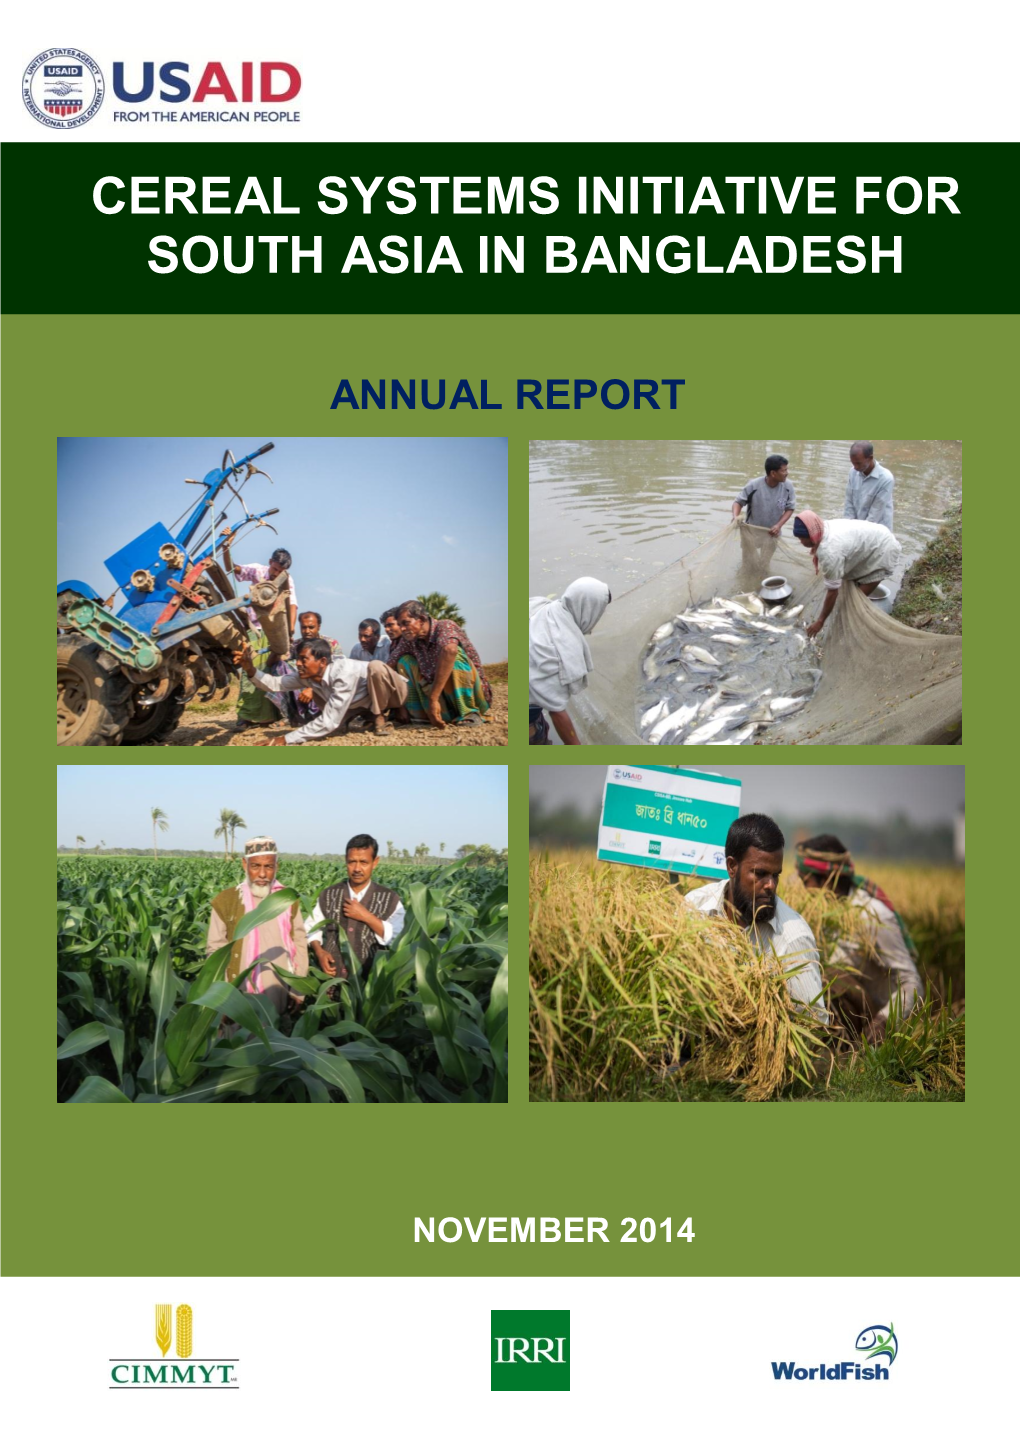 Cereal Systems Initiative for South Asia in Bangladesh